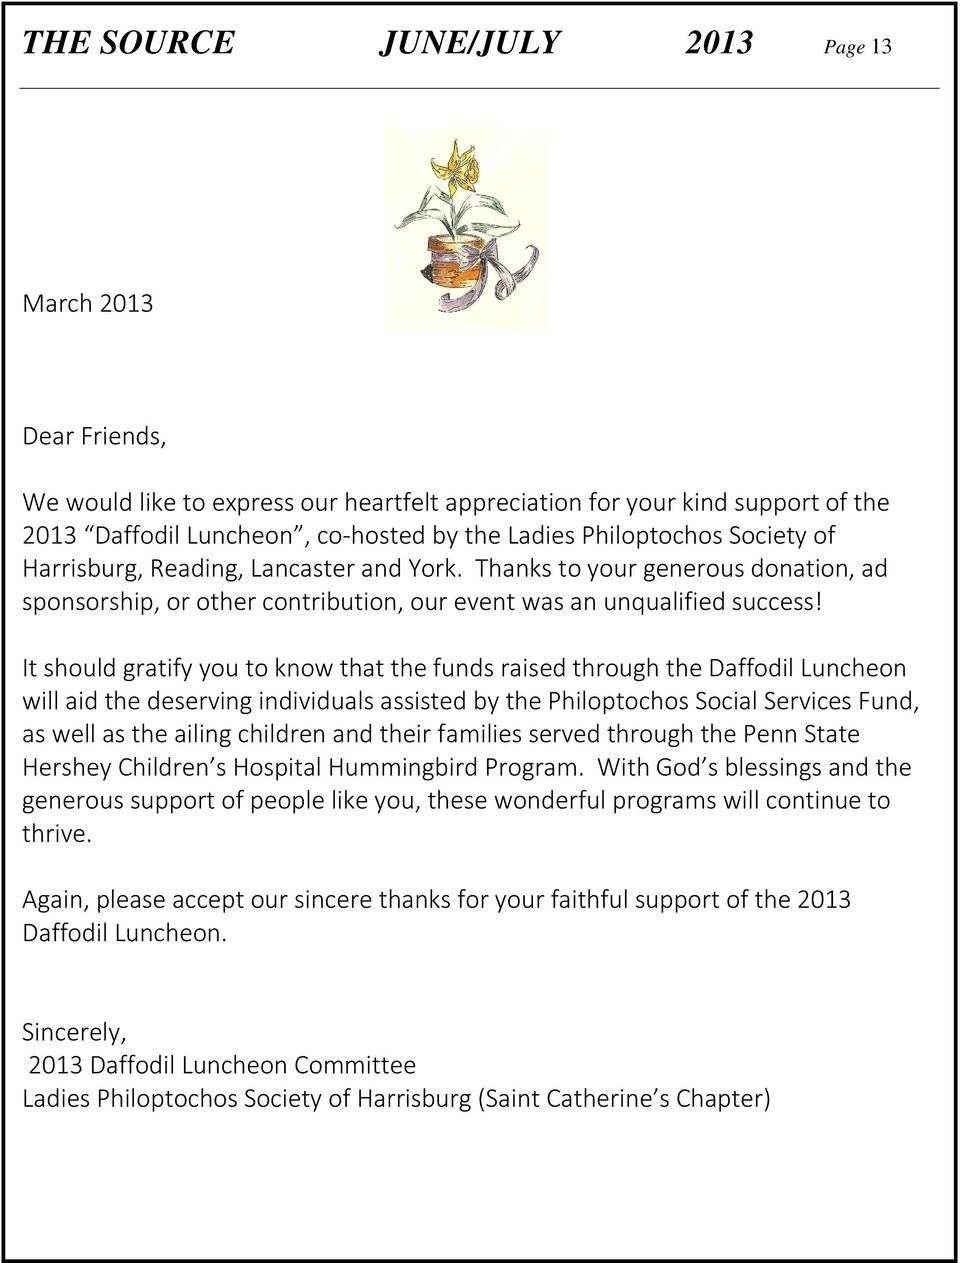 It should gratify you to know that the funds raised through the Daffodil Luncheon will aid the deserving individuals assisted by the Philoptochos Social Services Fund, as well as the ailing children